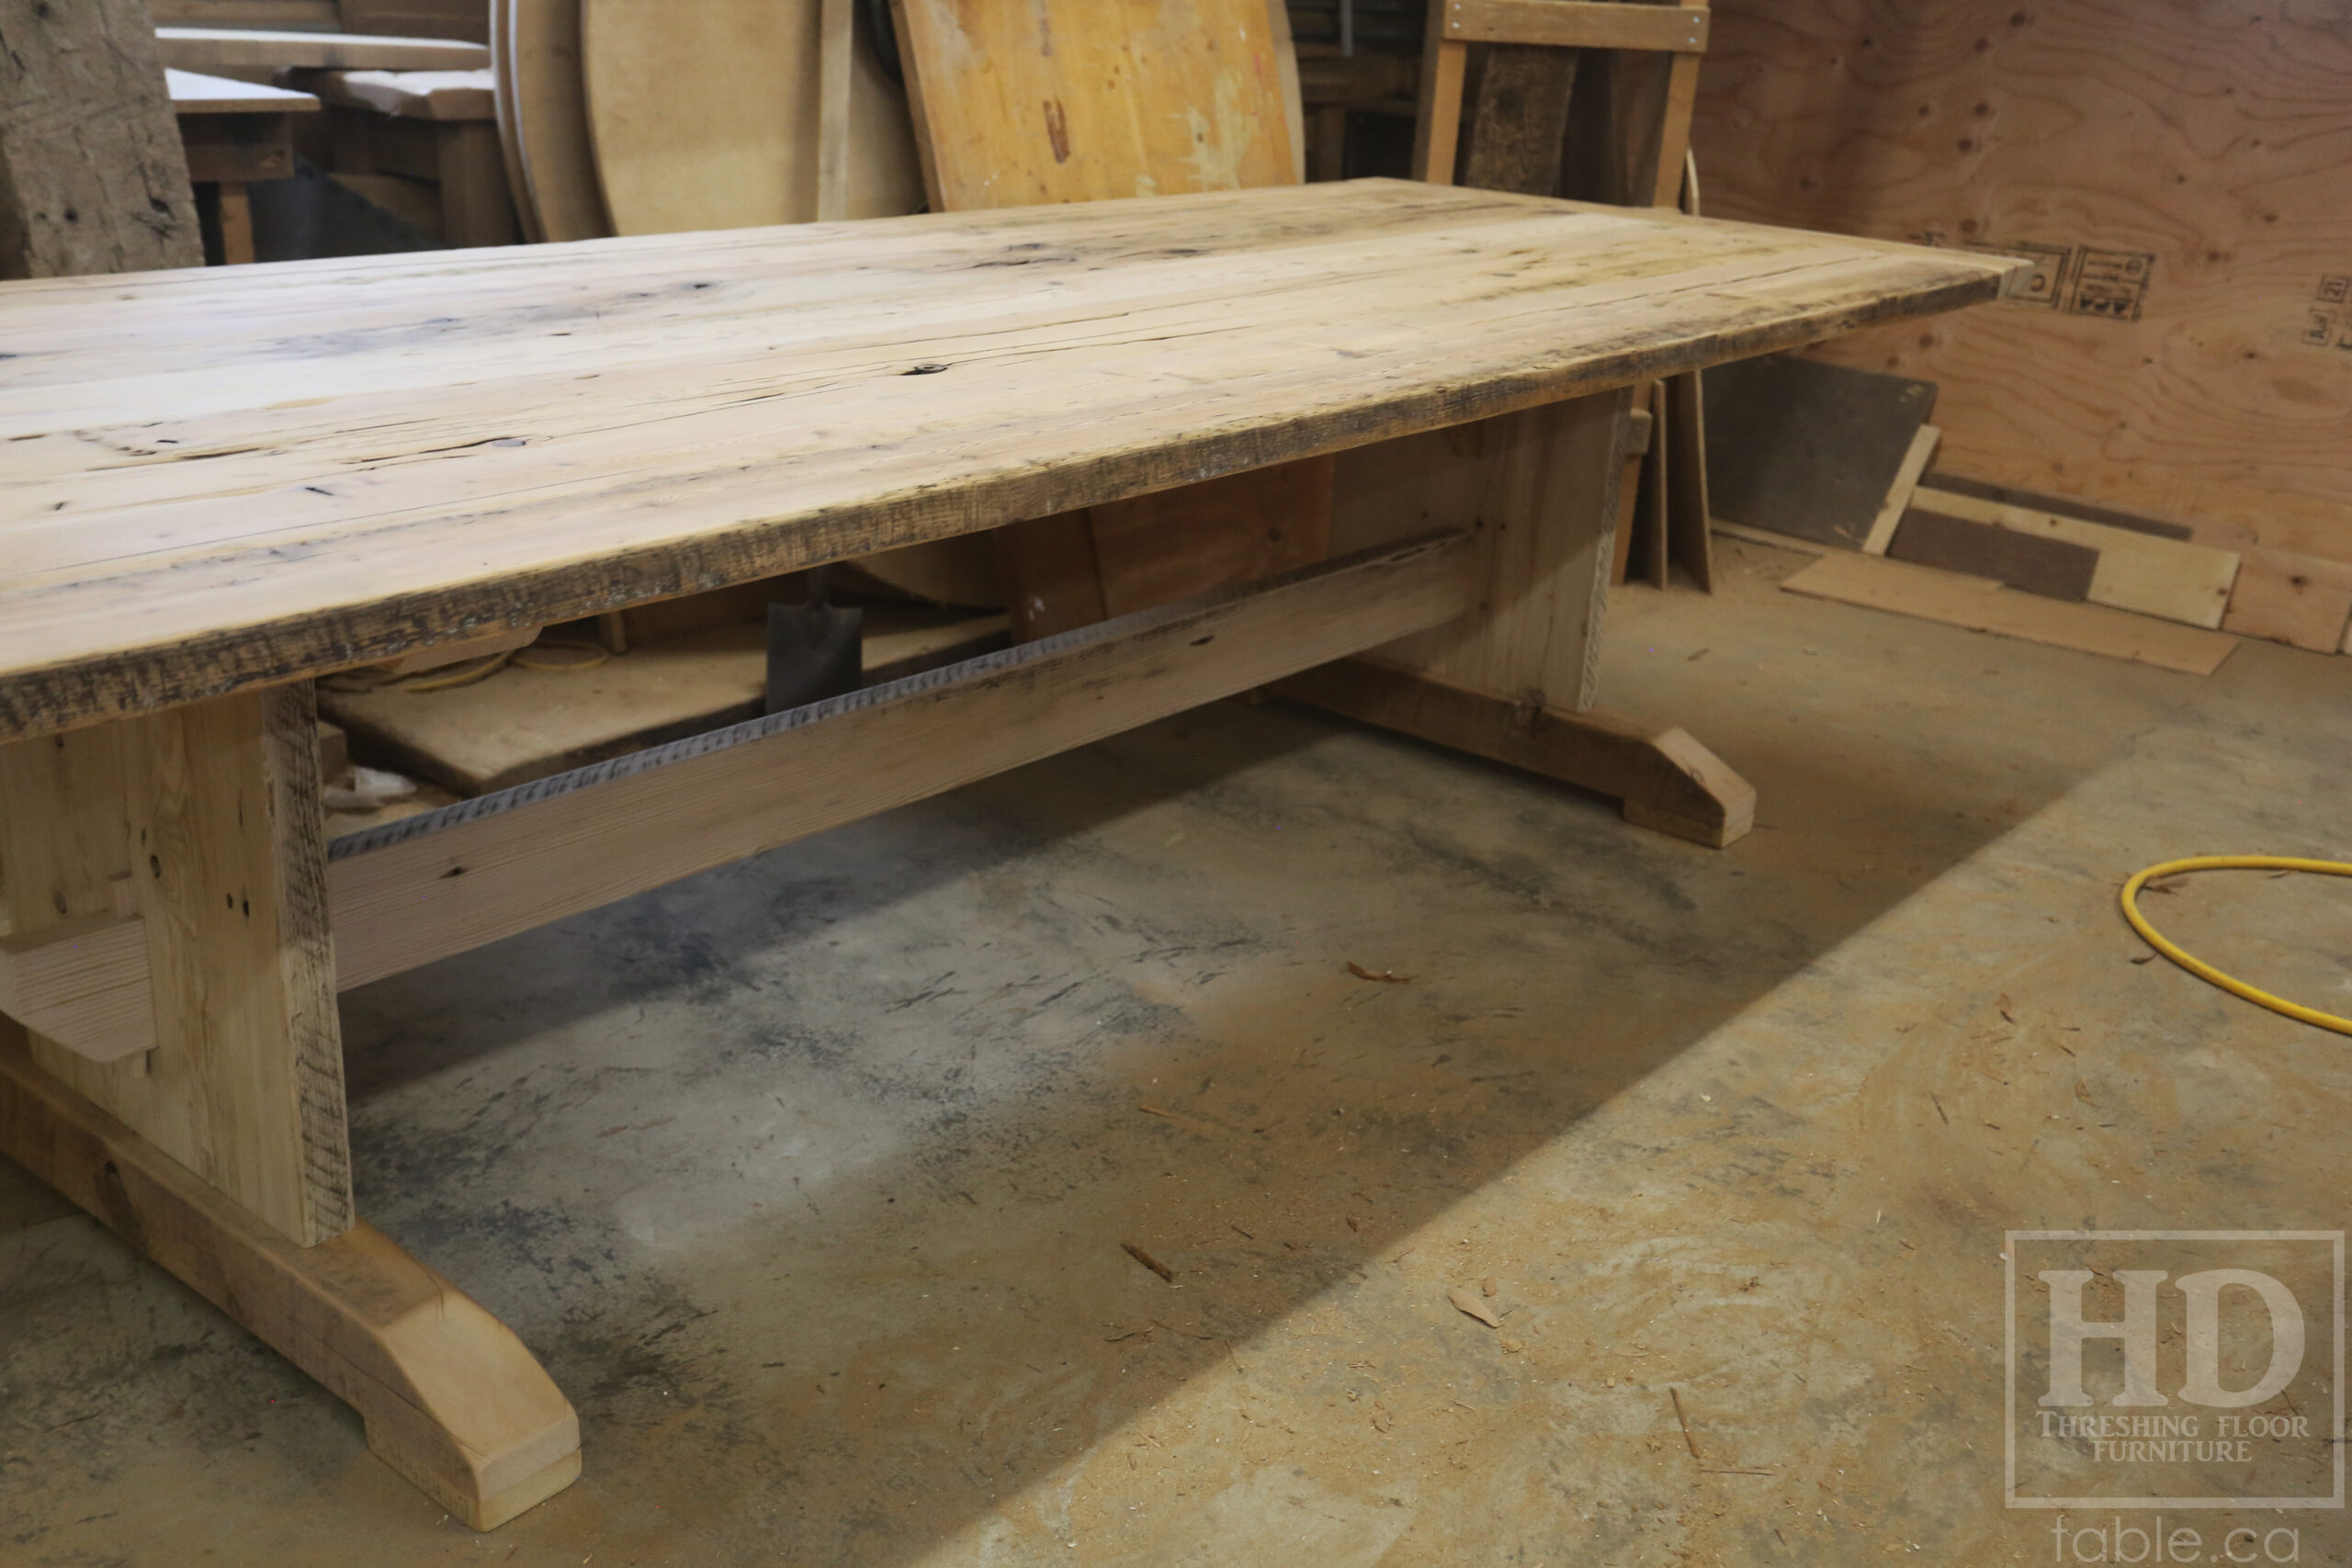 10’ Reclaimed Ontario Barnwood Trestle Table we made for an Oakville, Ontario home – 44” wide - Trestle Base [Painted Black] - Old Growth Hemlock Threshing Floor Construction - Original edges & distressing maintained – Bread Edge Board Ends – Premium epoxy + matte polyurethane finish - www.table.ca